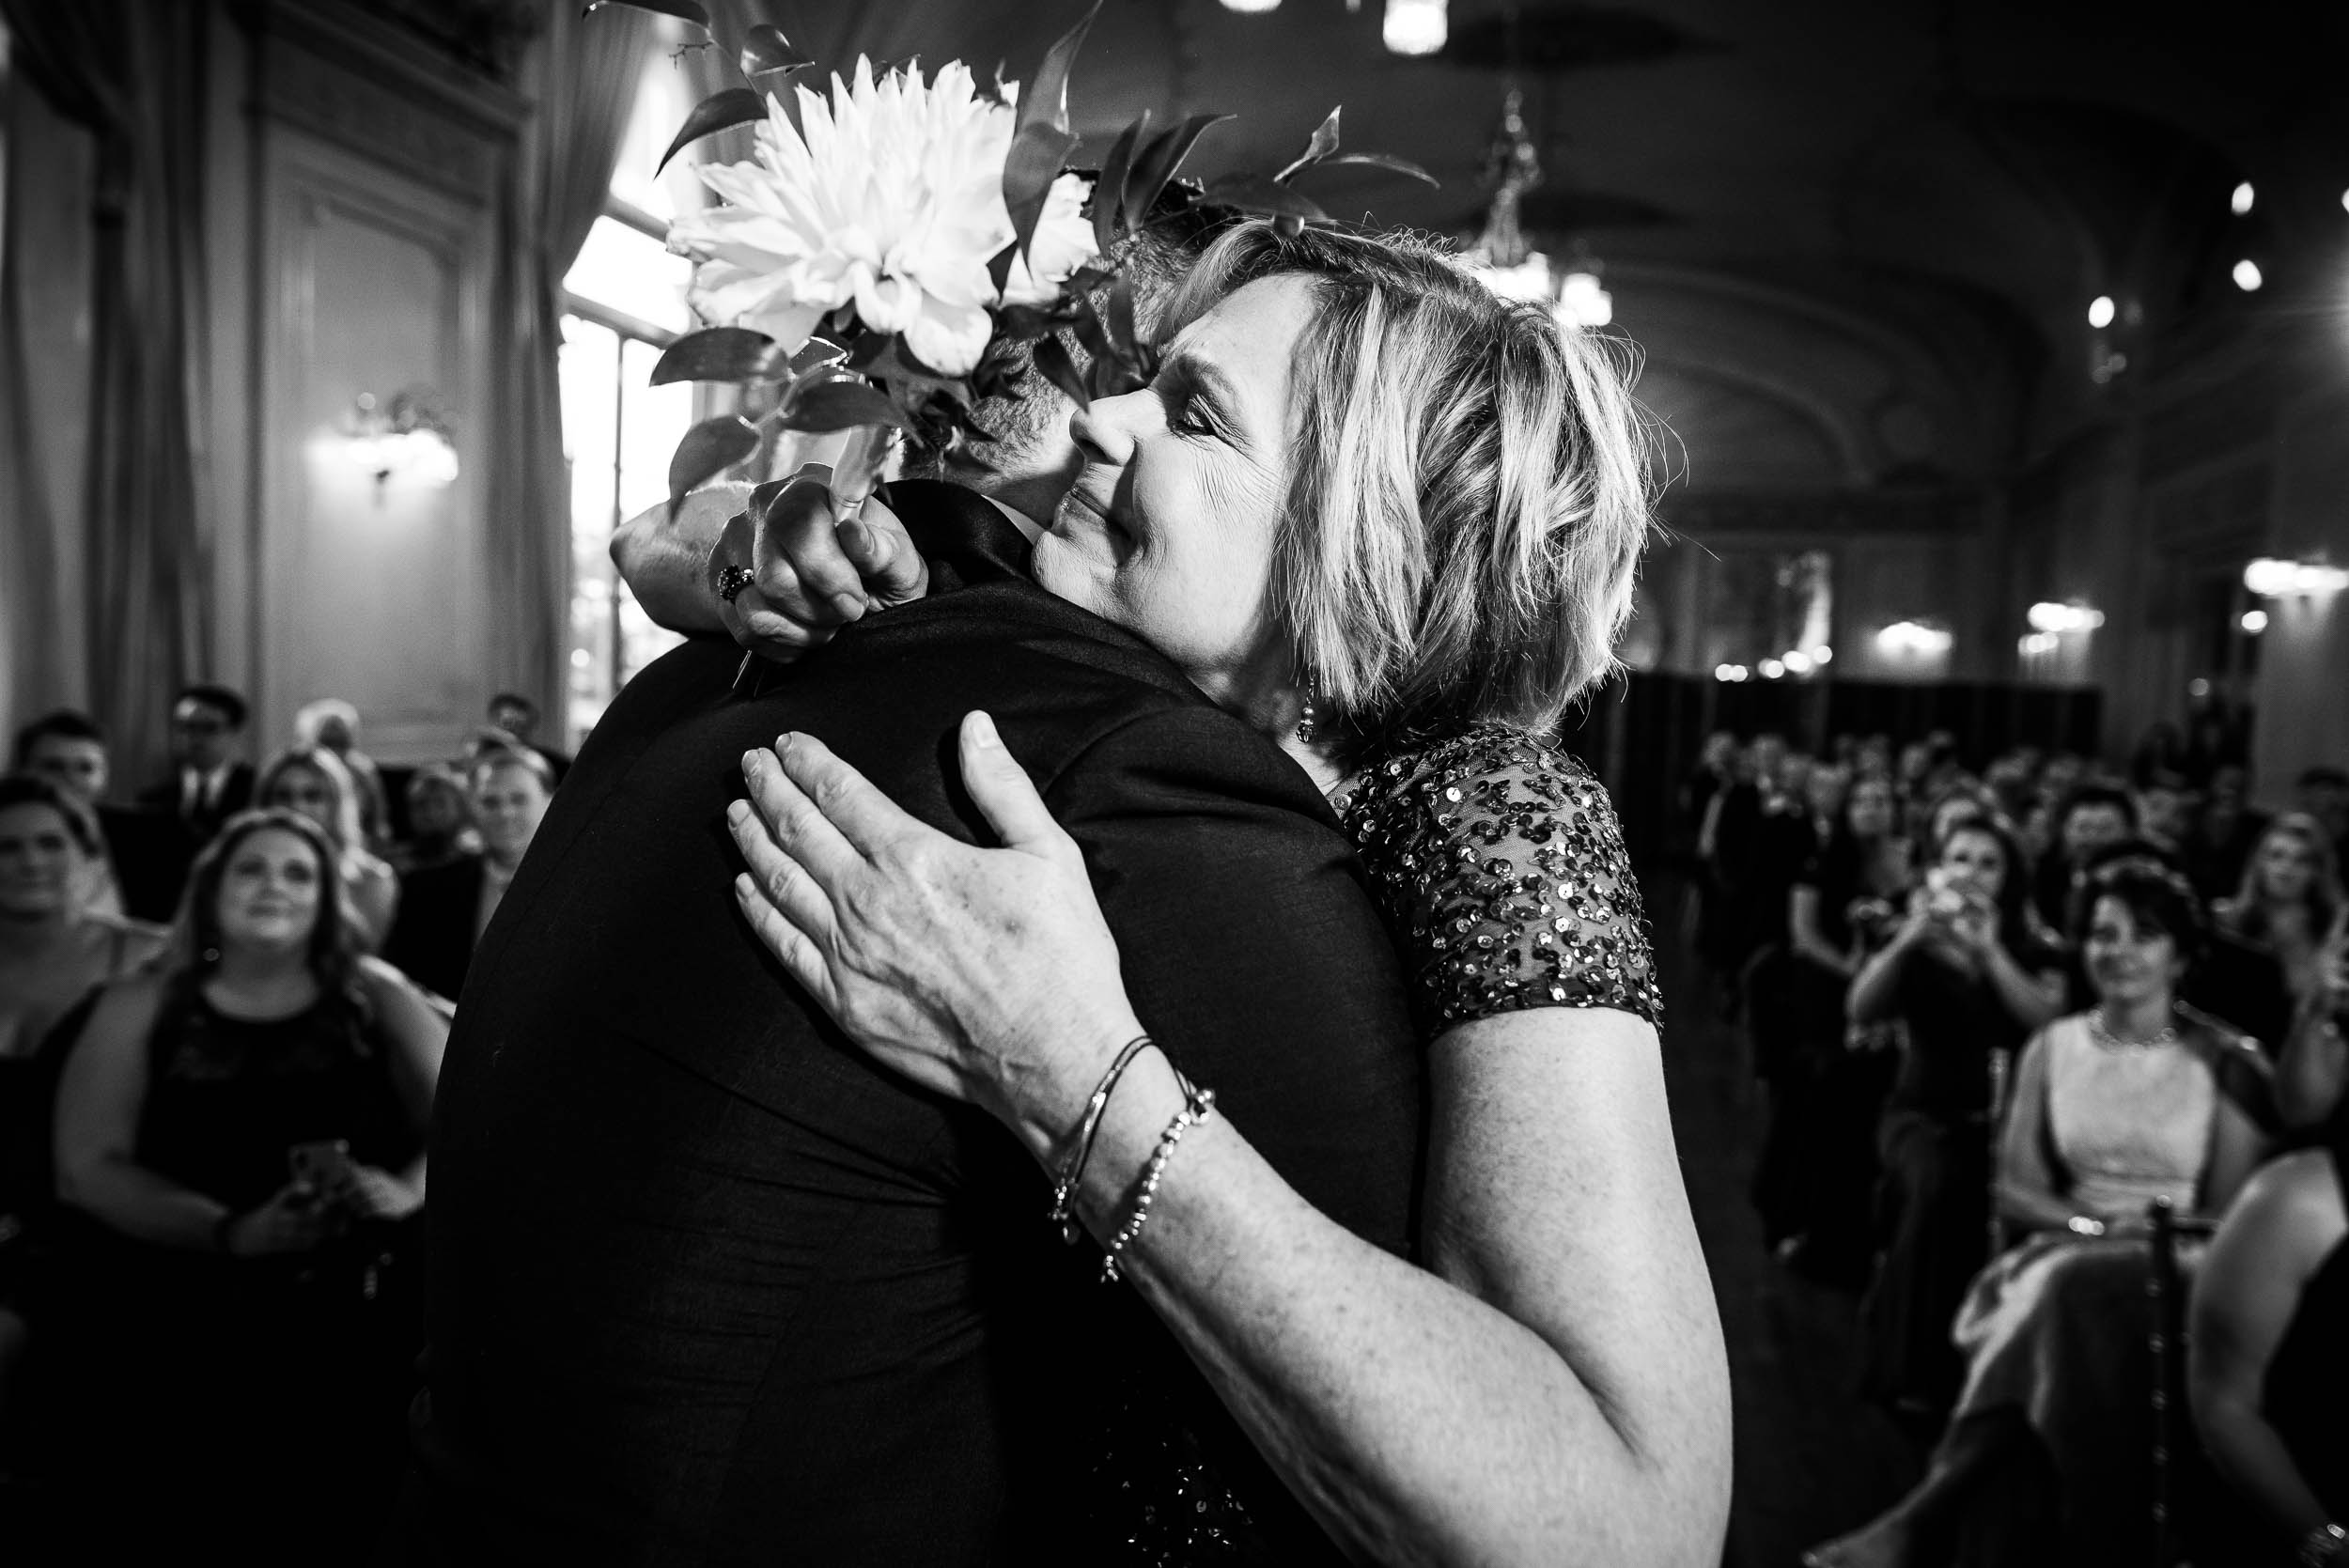 Emotional wedding photos from luxurious fall wedding at the Chicago Symphony Center captured by J. Brown Photography. See more wedding ideas at jbrownphotography.com!